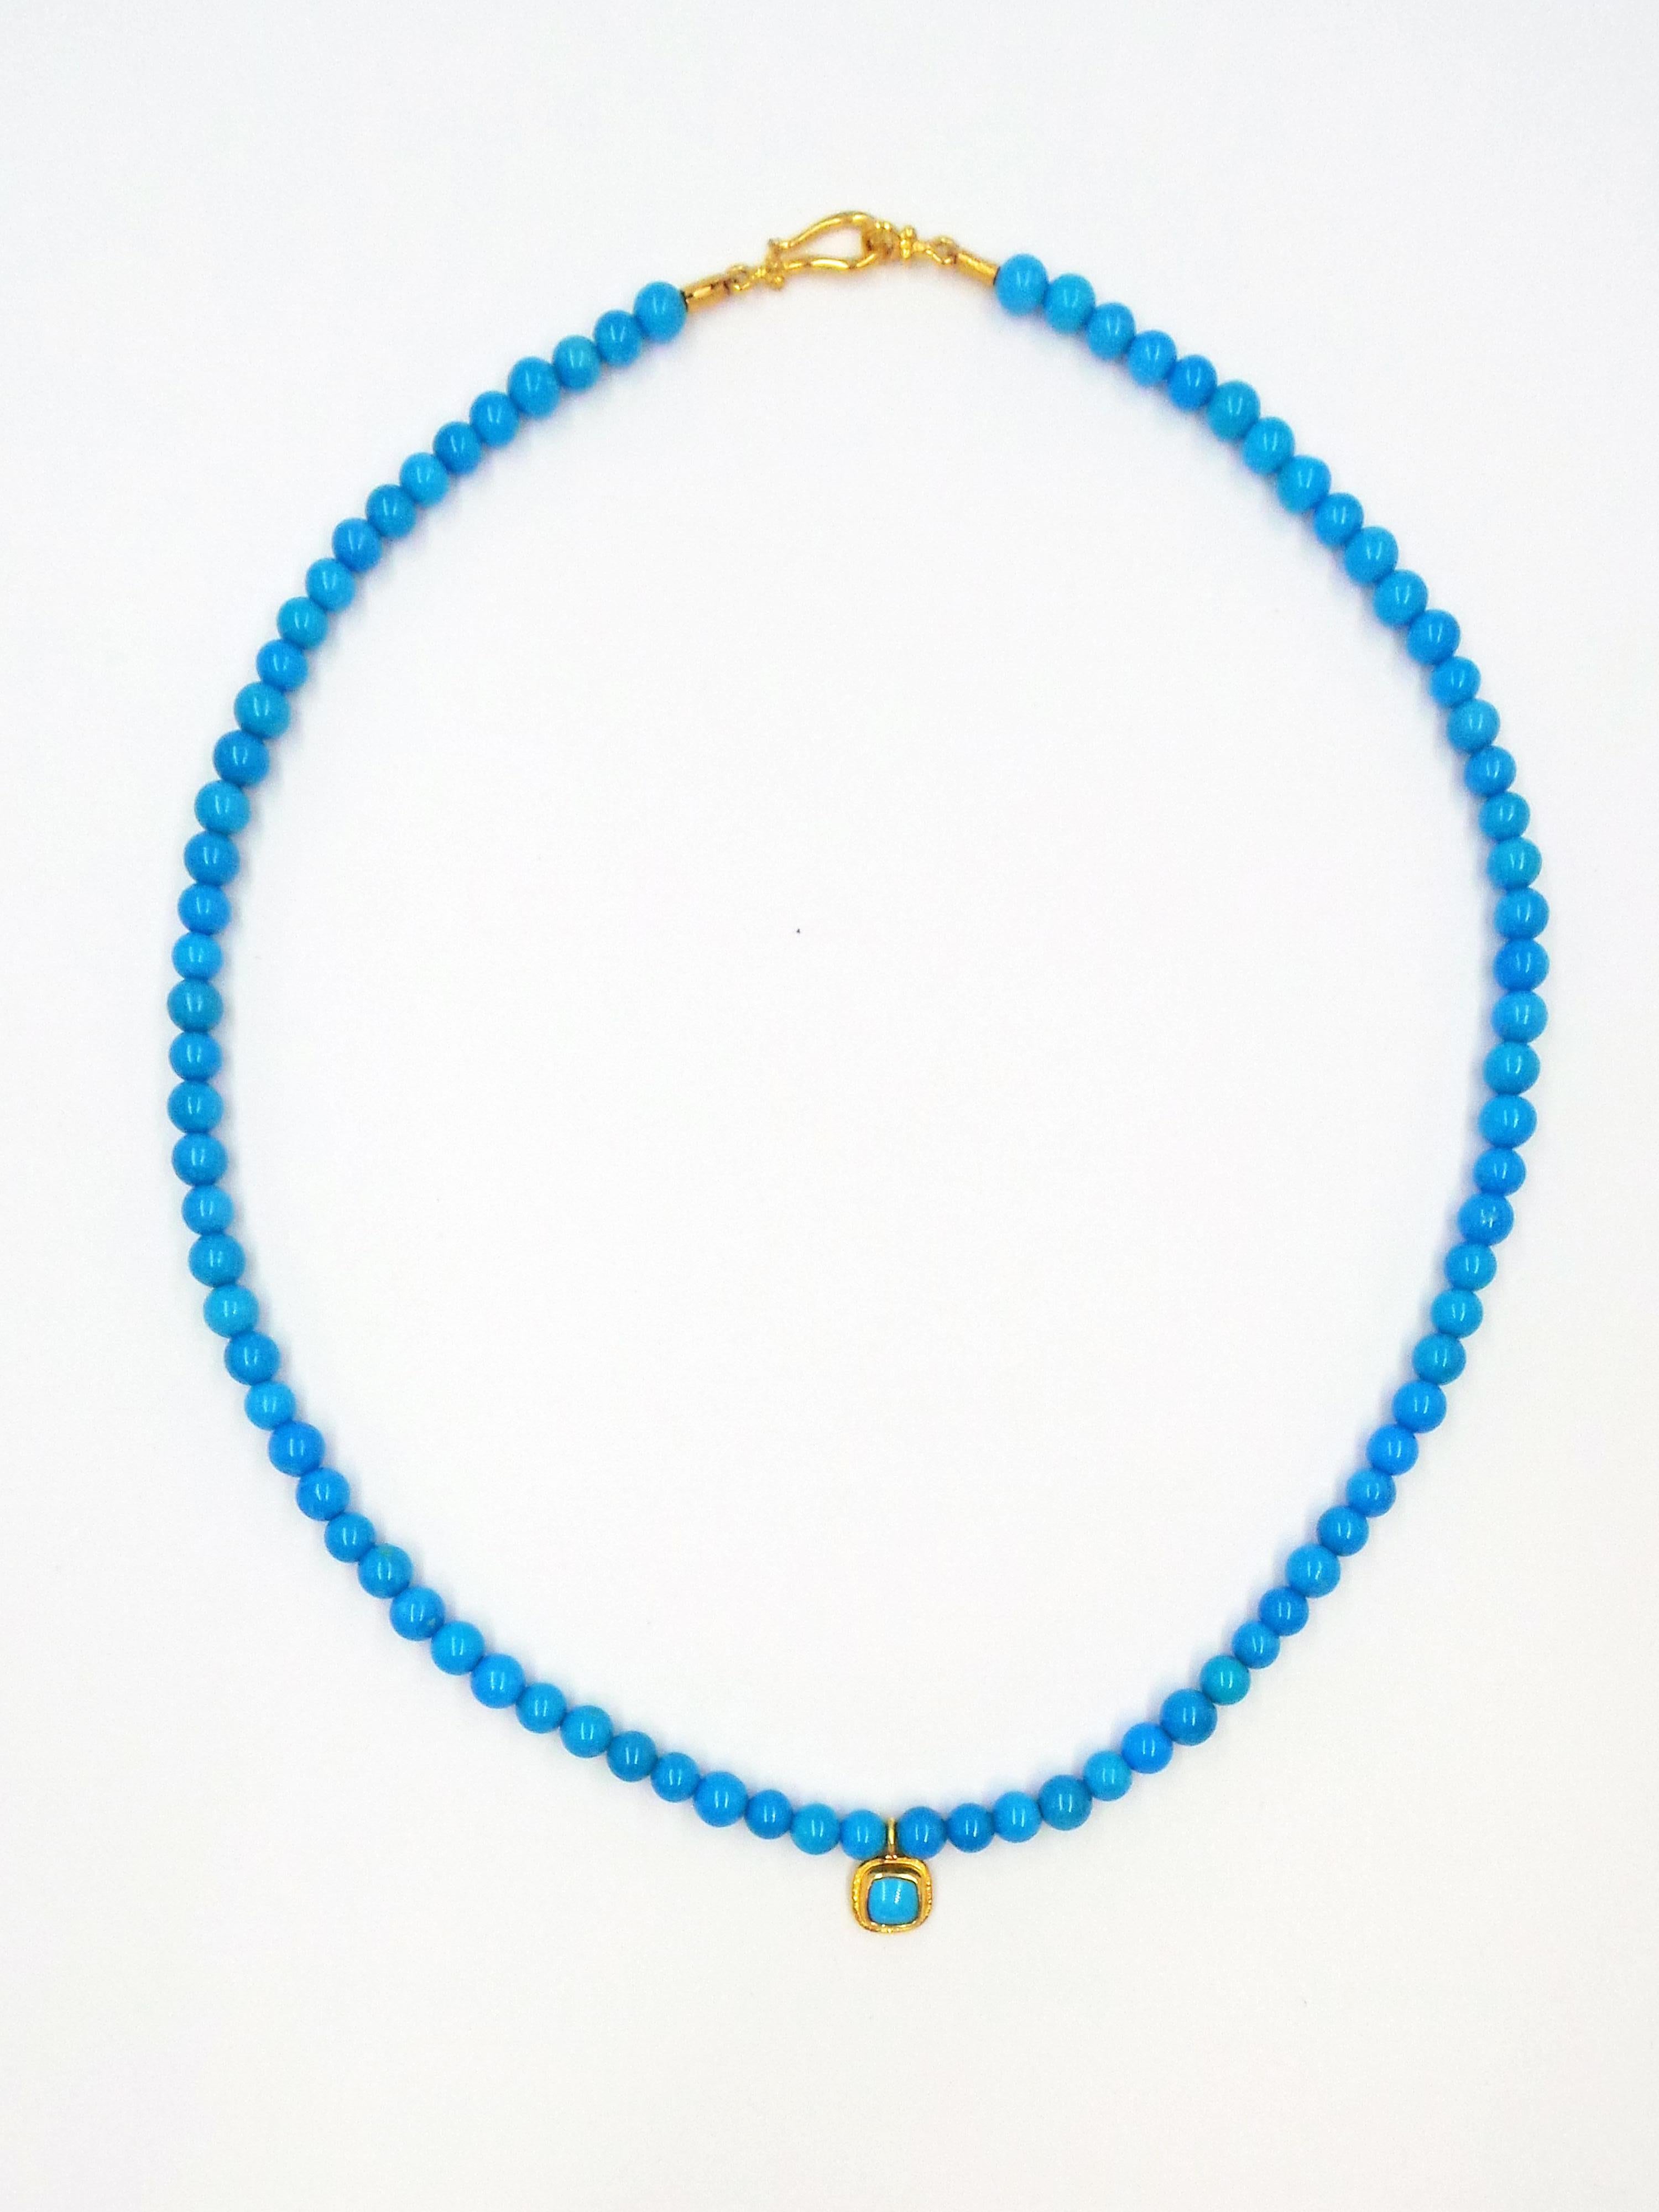 Necklace, ring and earrings set comprised completely of high-grade Sleeping Beauty Turquoise and 22k yellow gold. Necklace is made of round, 5mm Turquoise beads, solid hook closure, and rounded square or cushion shaped Turquoise gemstone cabochon in